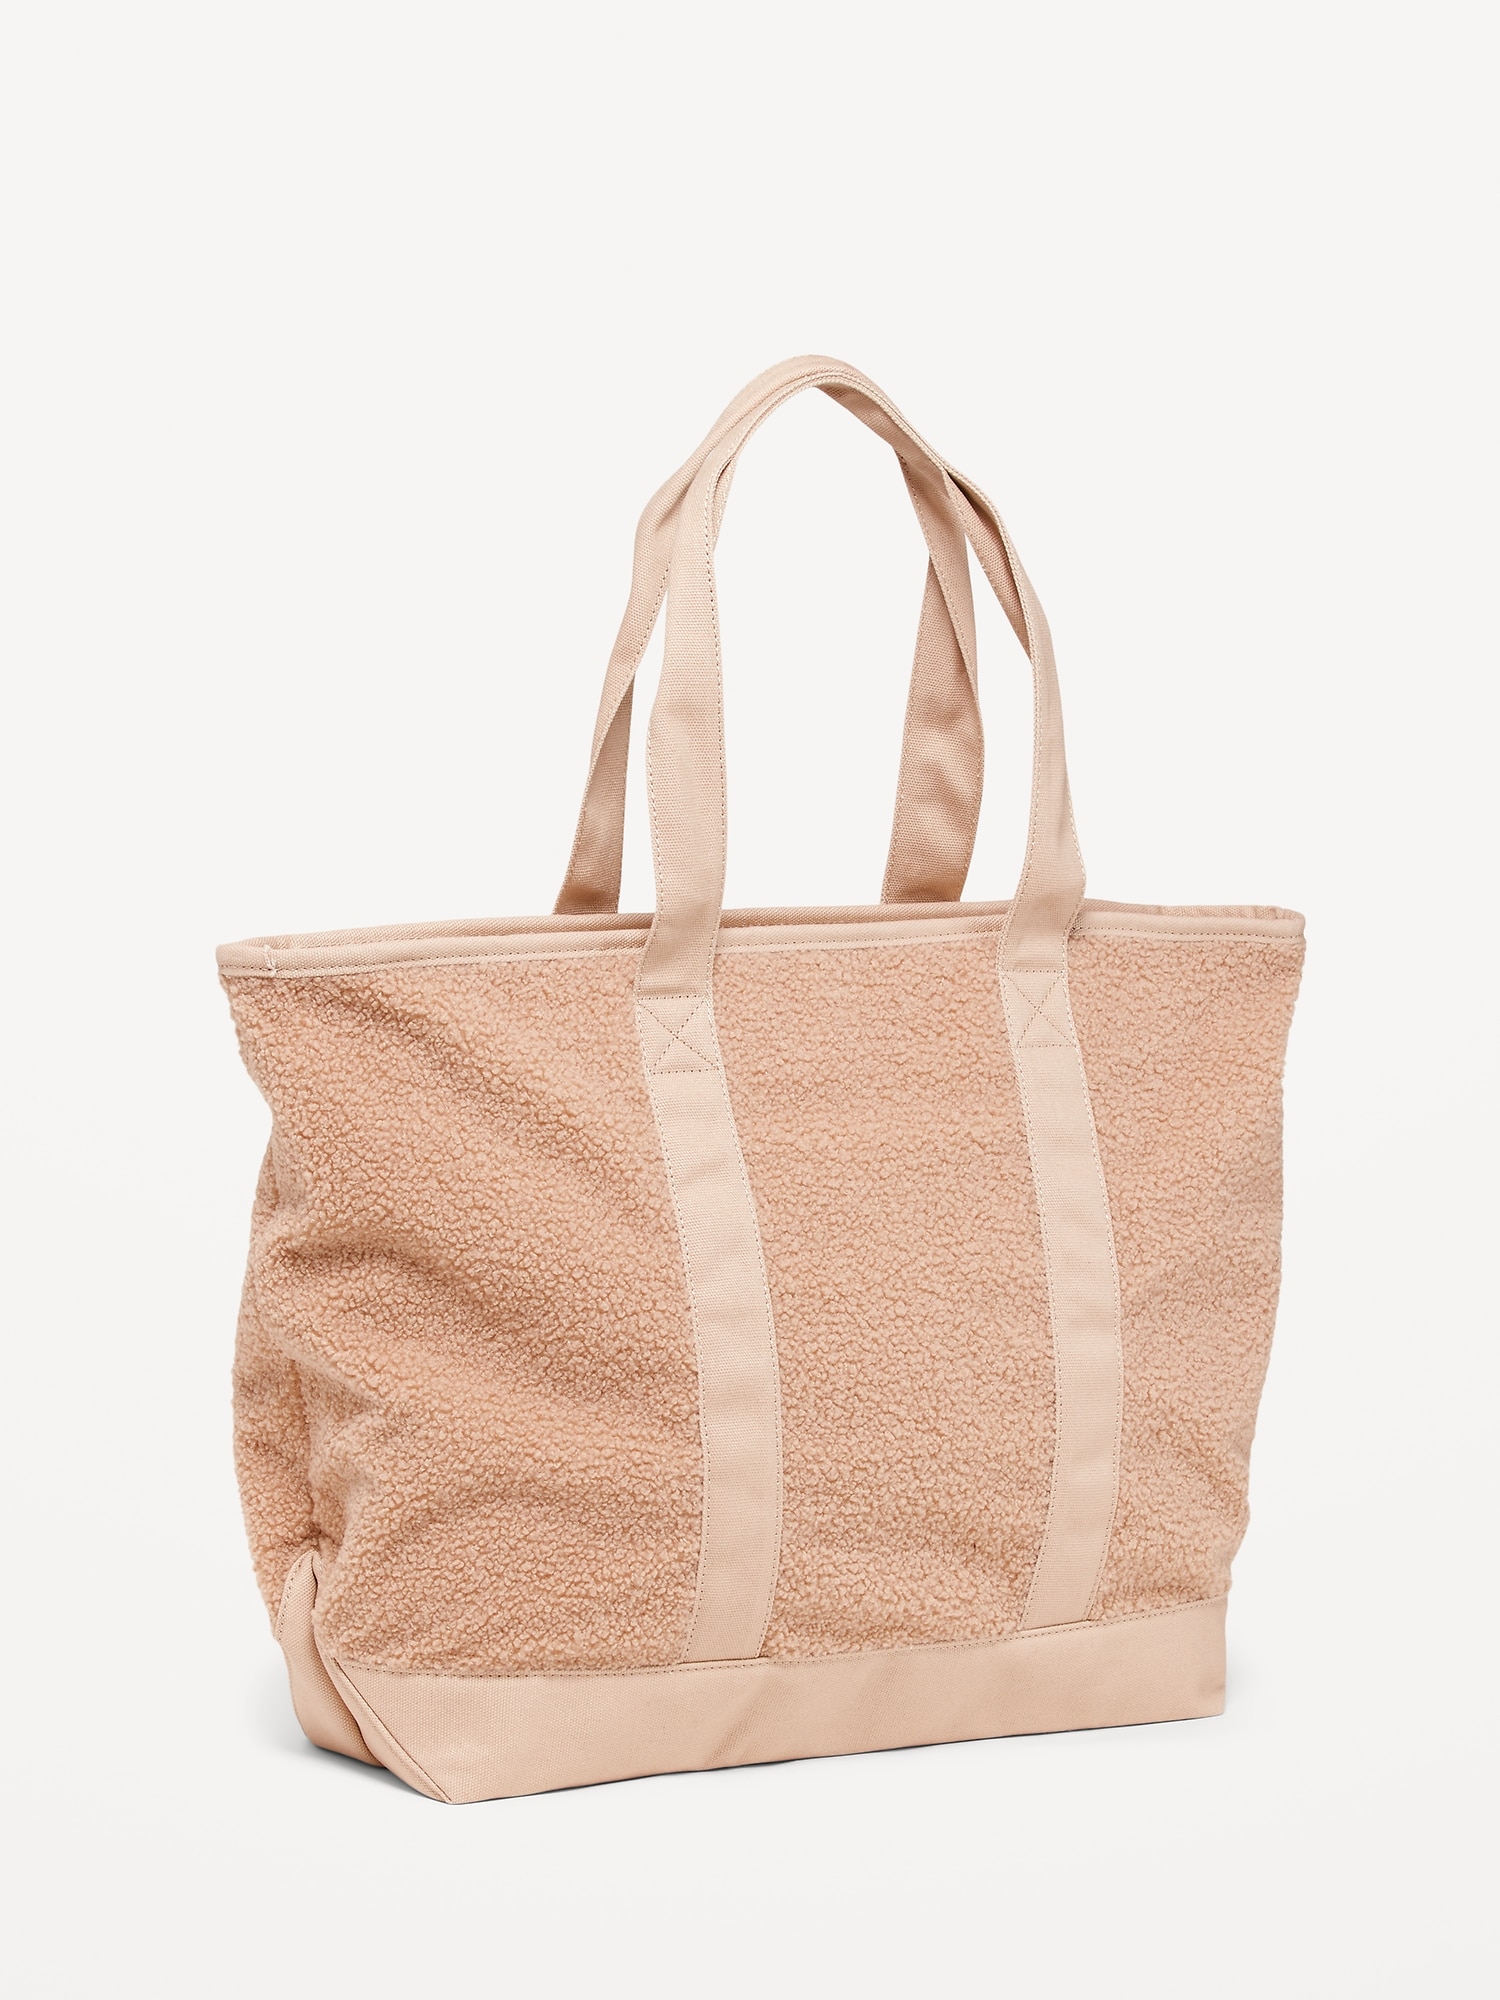 Oldnavy Canvas Tote Bag for Adults